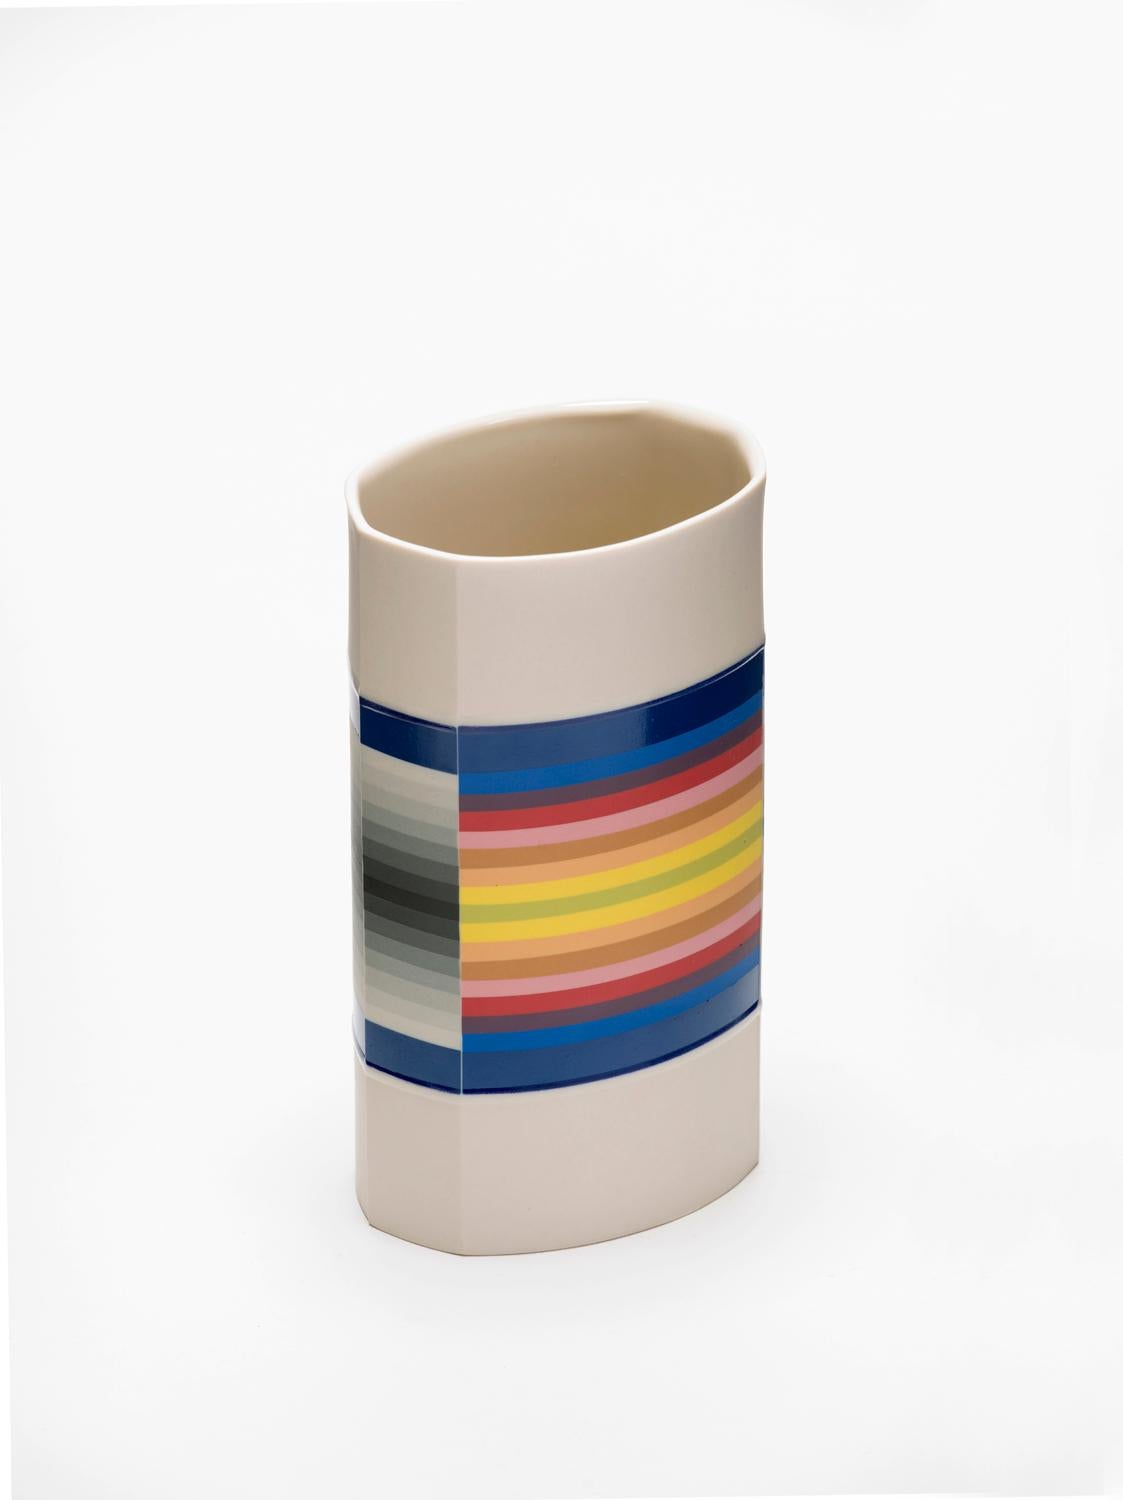 Peter Pincus
Column III, 2018
Colored porcelain
8 x 4.75 x 3.5 in
Signed 